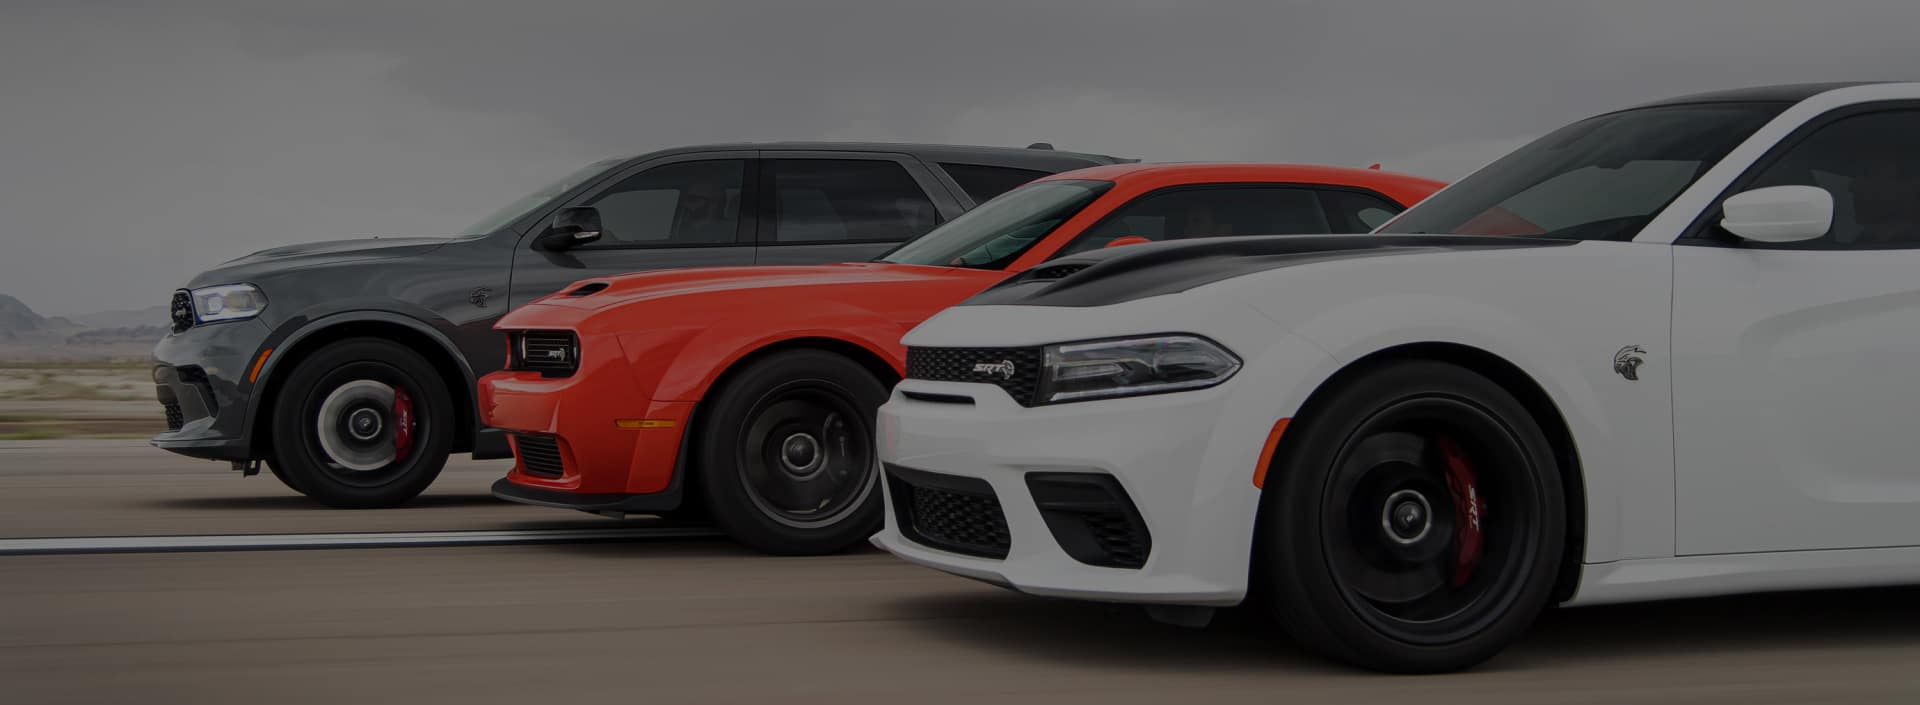 Lineup of FCA vehicles